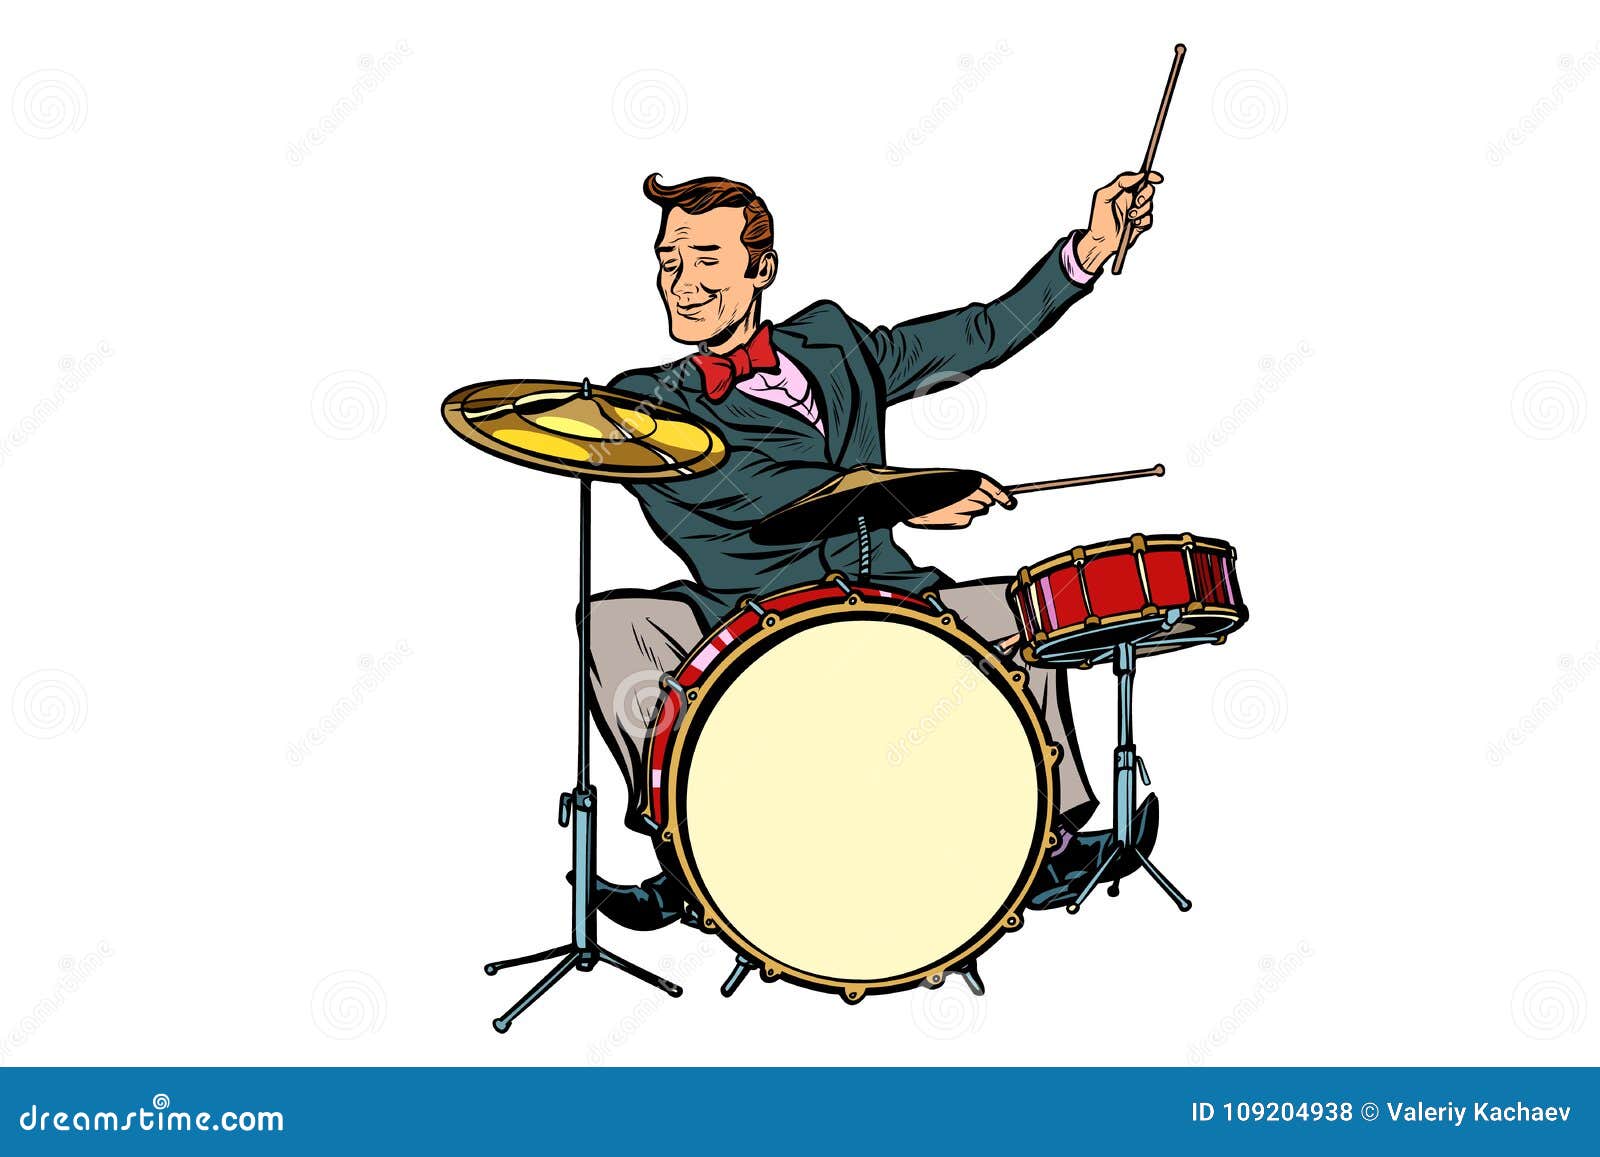 Drummer Cartoons, Illustrations & Vector Stock Images - 2661 Pictures